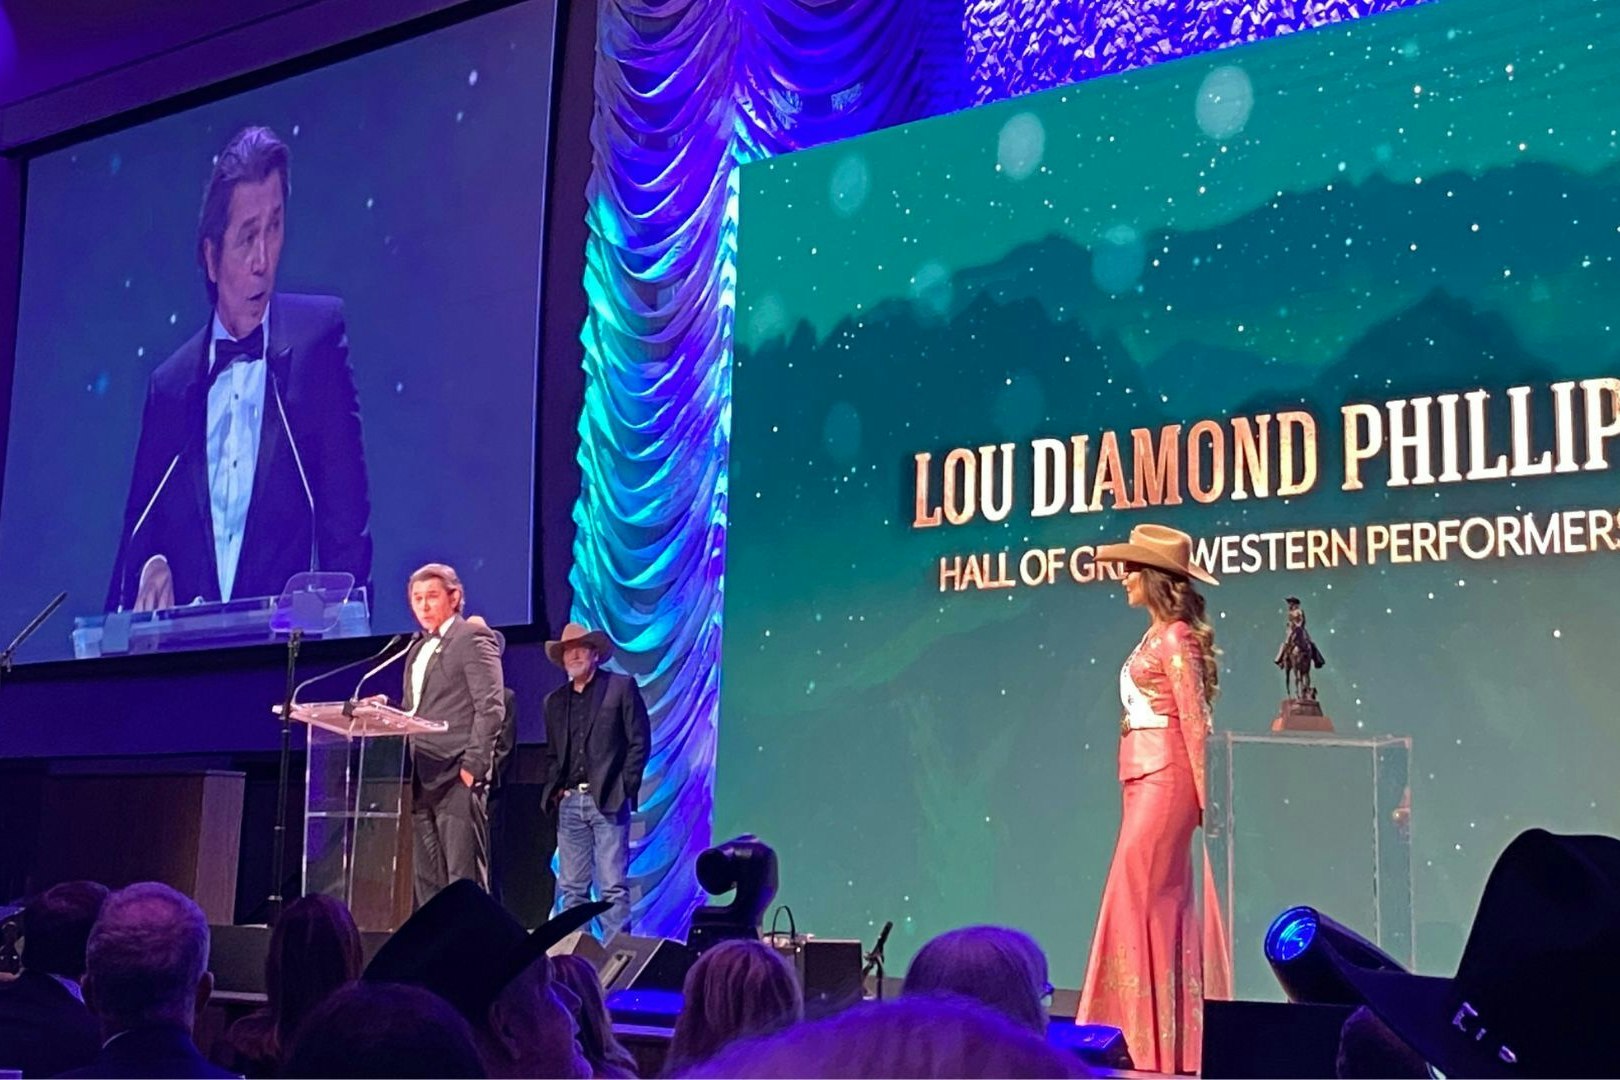 "Longmire" actor Lou Diamond Phillips accepts induction into the Hall of Great Western Performers on Saturday.